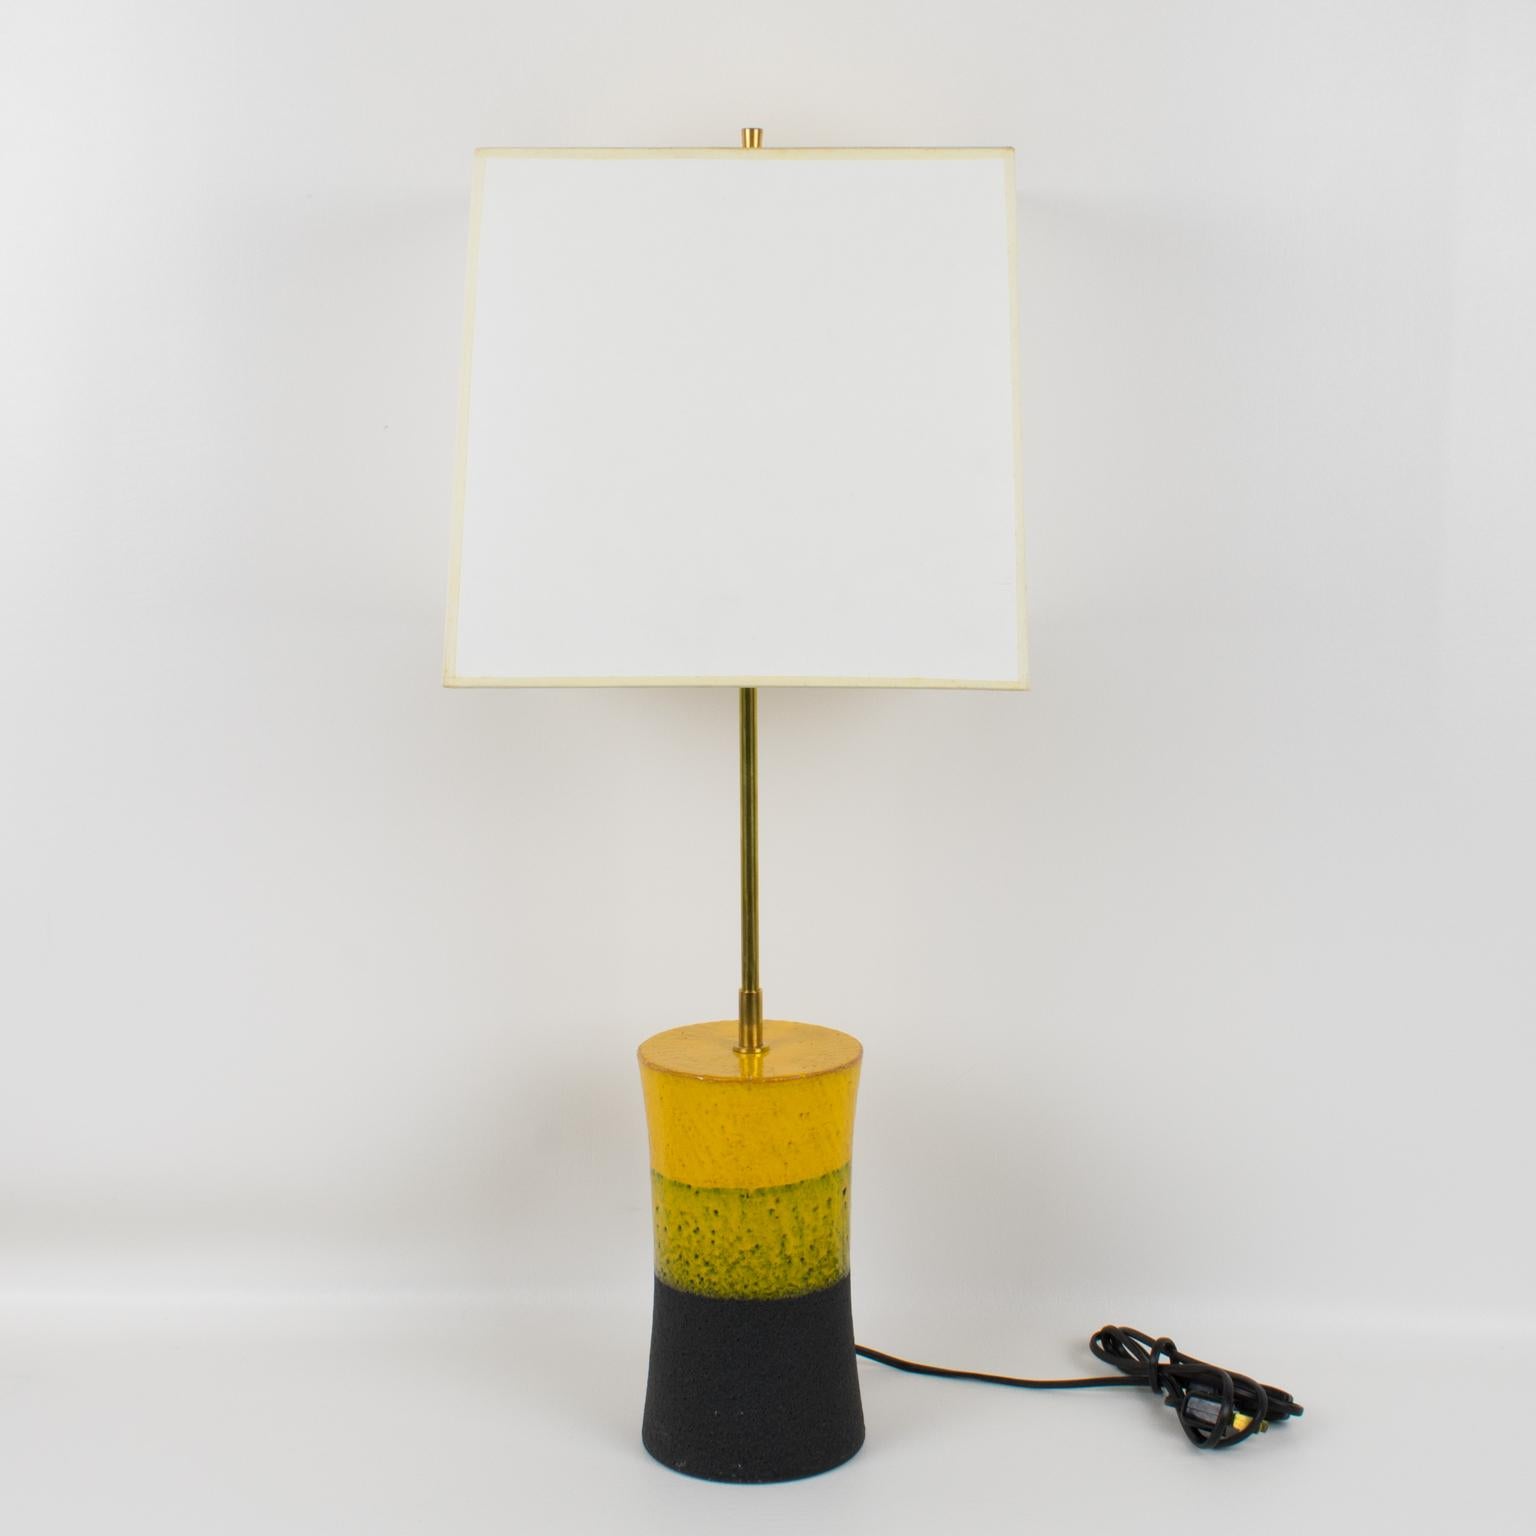 This striking 1960s Aldo Londi for Bitossi geometric ceramic table lamp was imported and distributed in the United States by Raymor of New York. This table lamp features a 